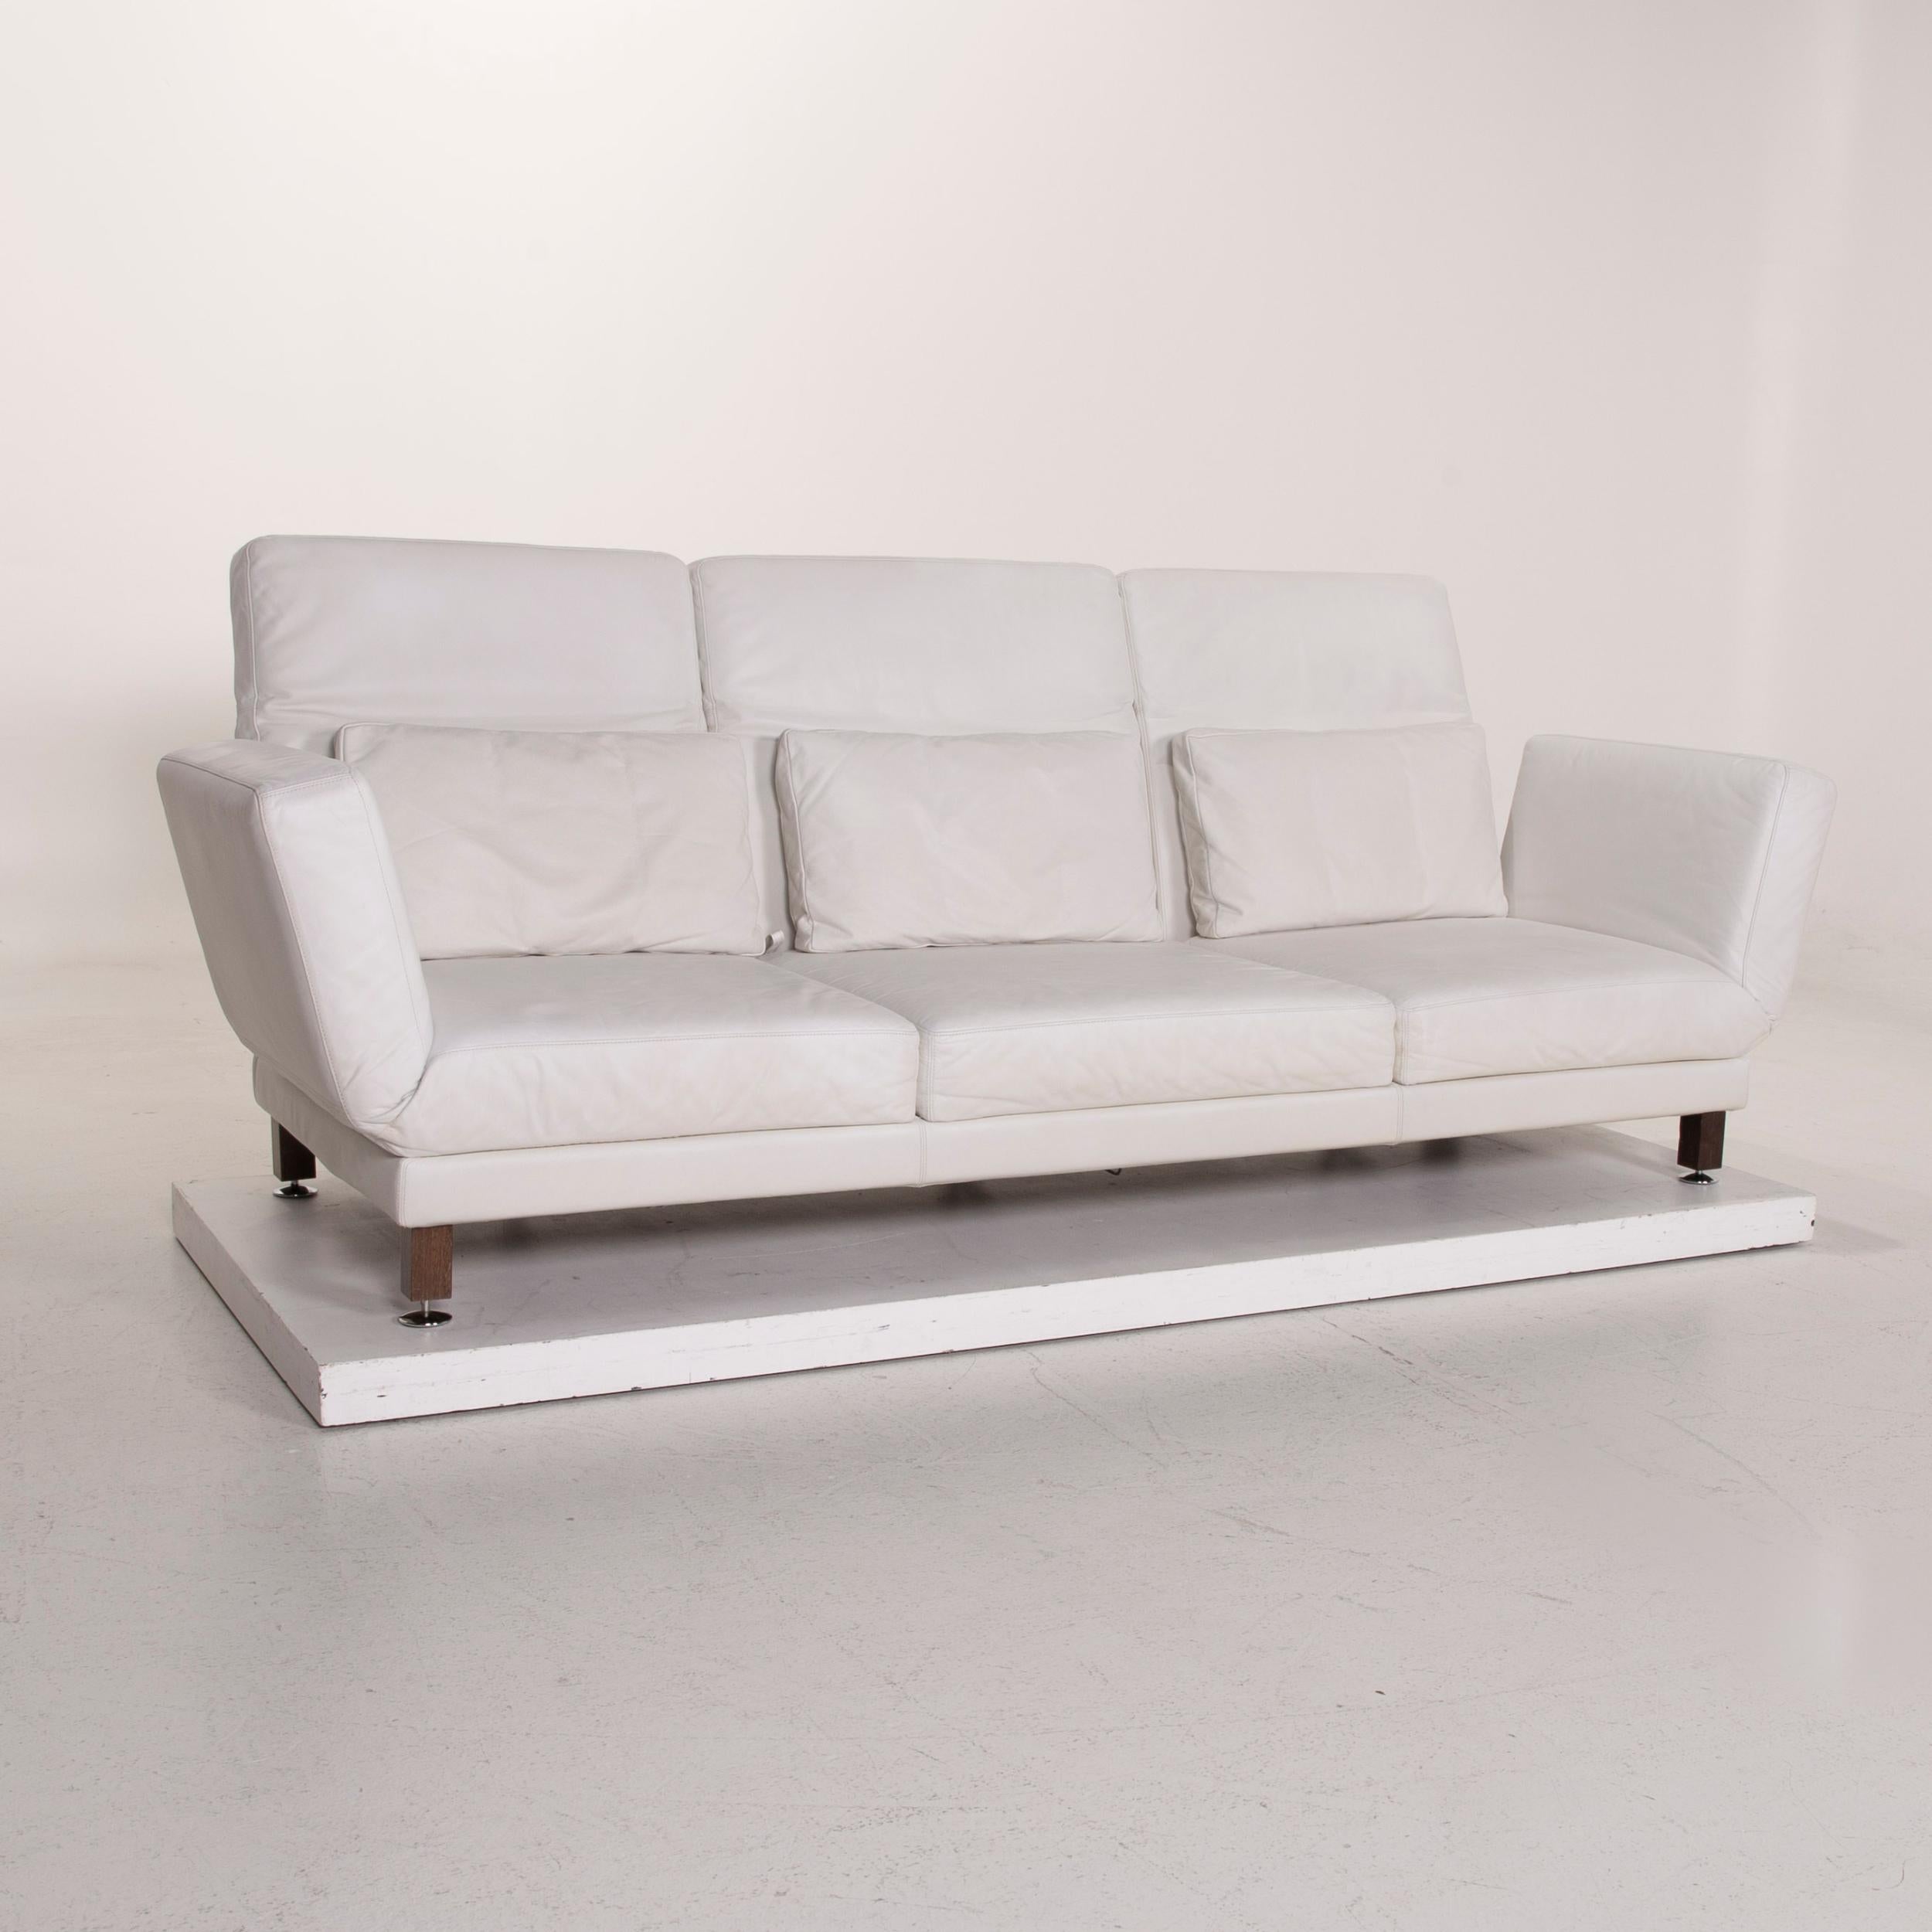 Brühl & Sippold Moule Leather Sofa White Three-Seat Relaxation Function For Sale 2